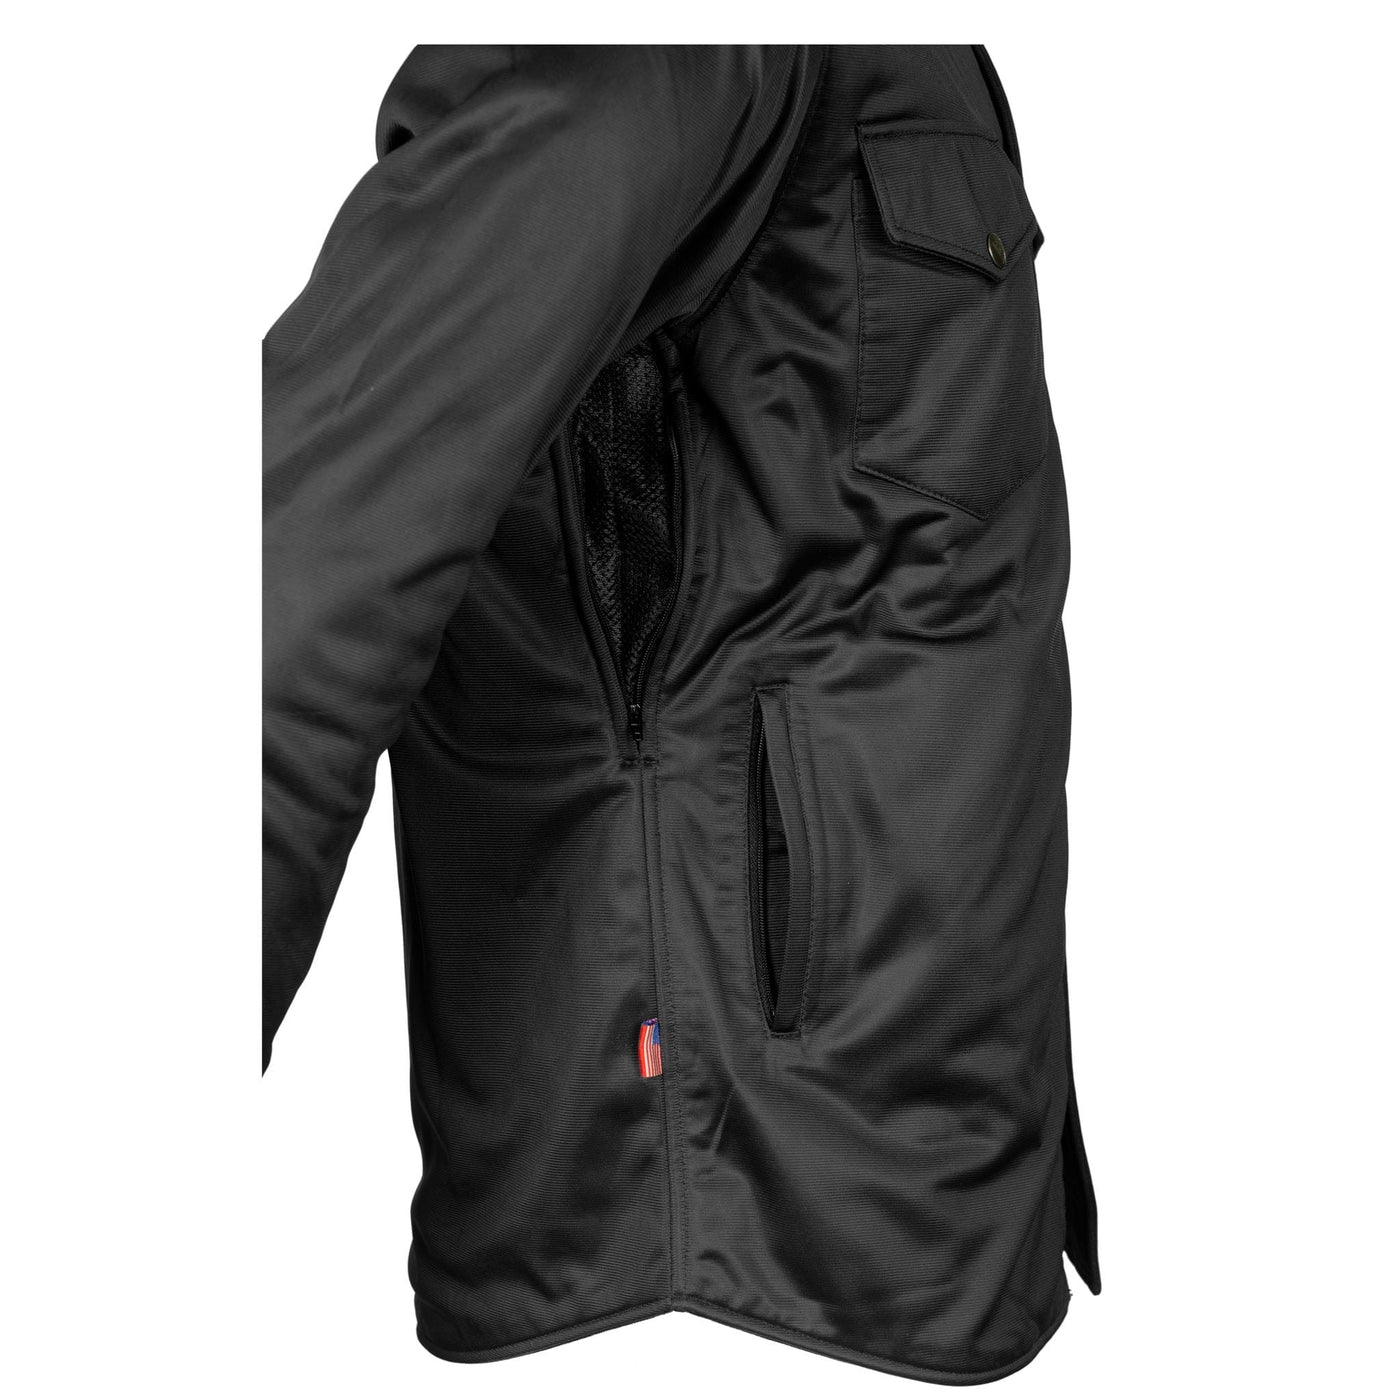 Ultra Protective Shirt with Pads - Black Solid